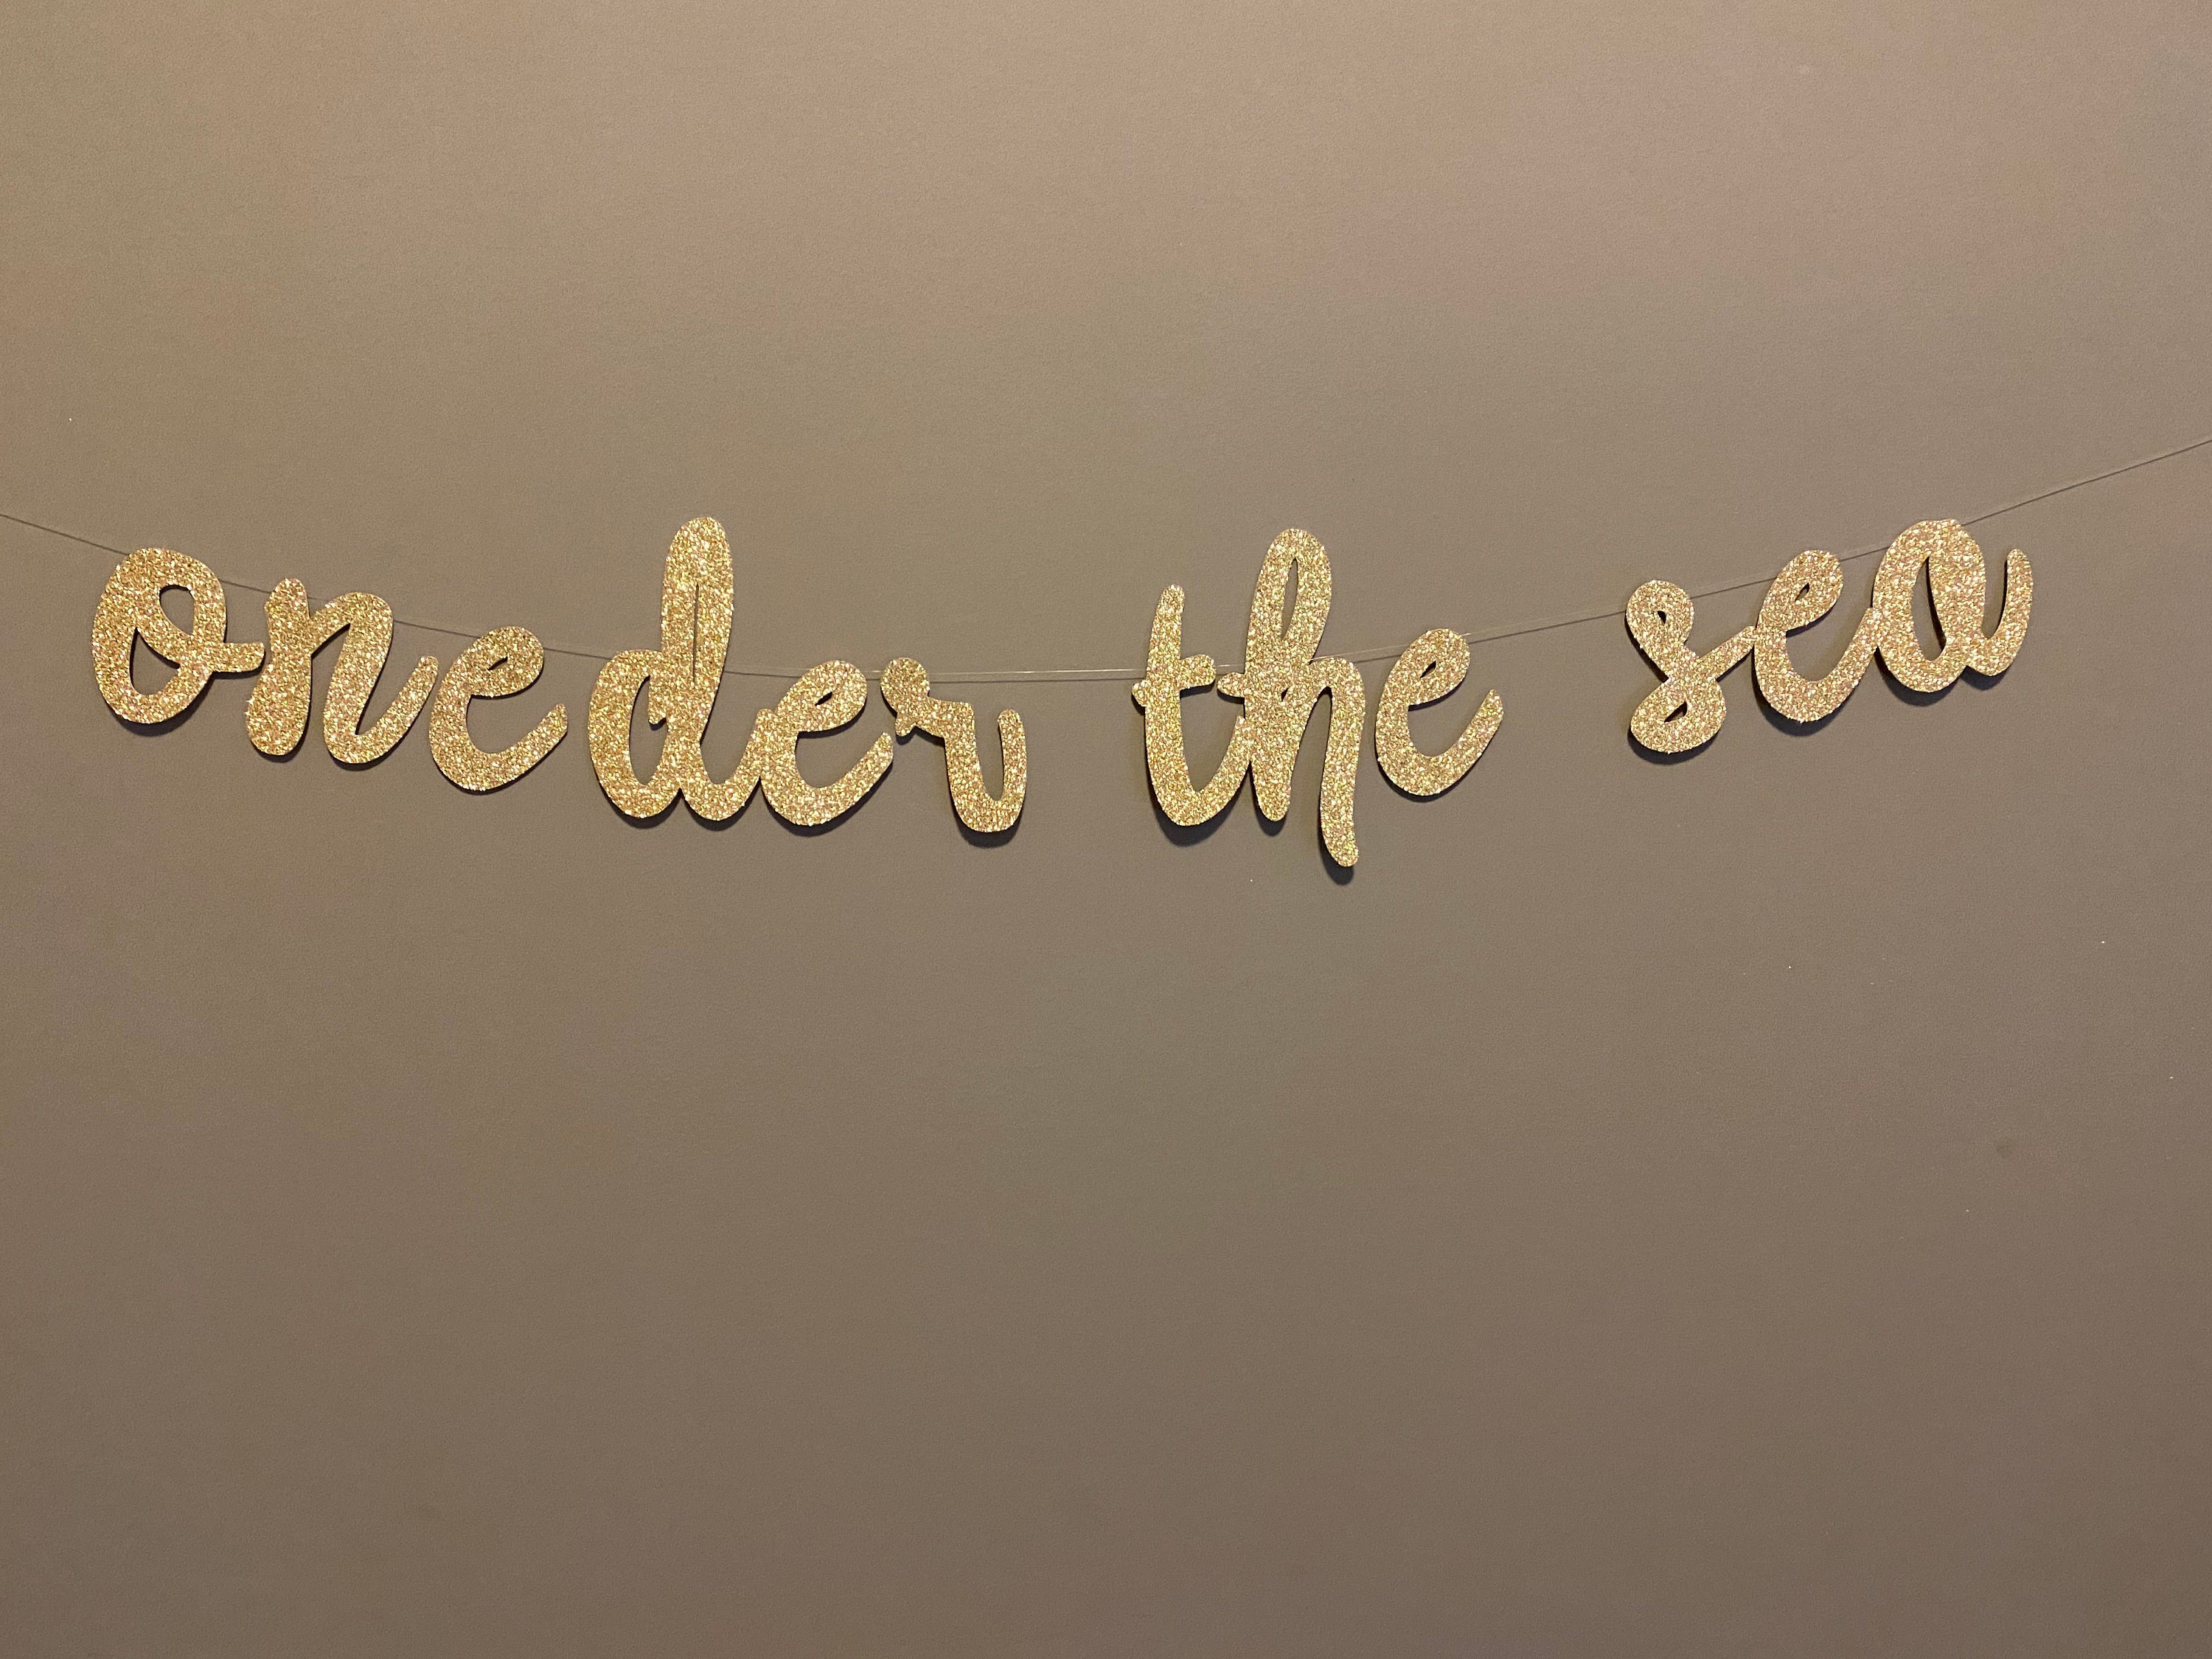 ONEDER THE SEA Banner Garland, the Sea Banner, First Birthday